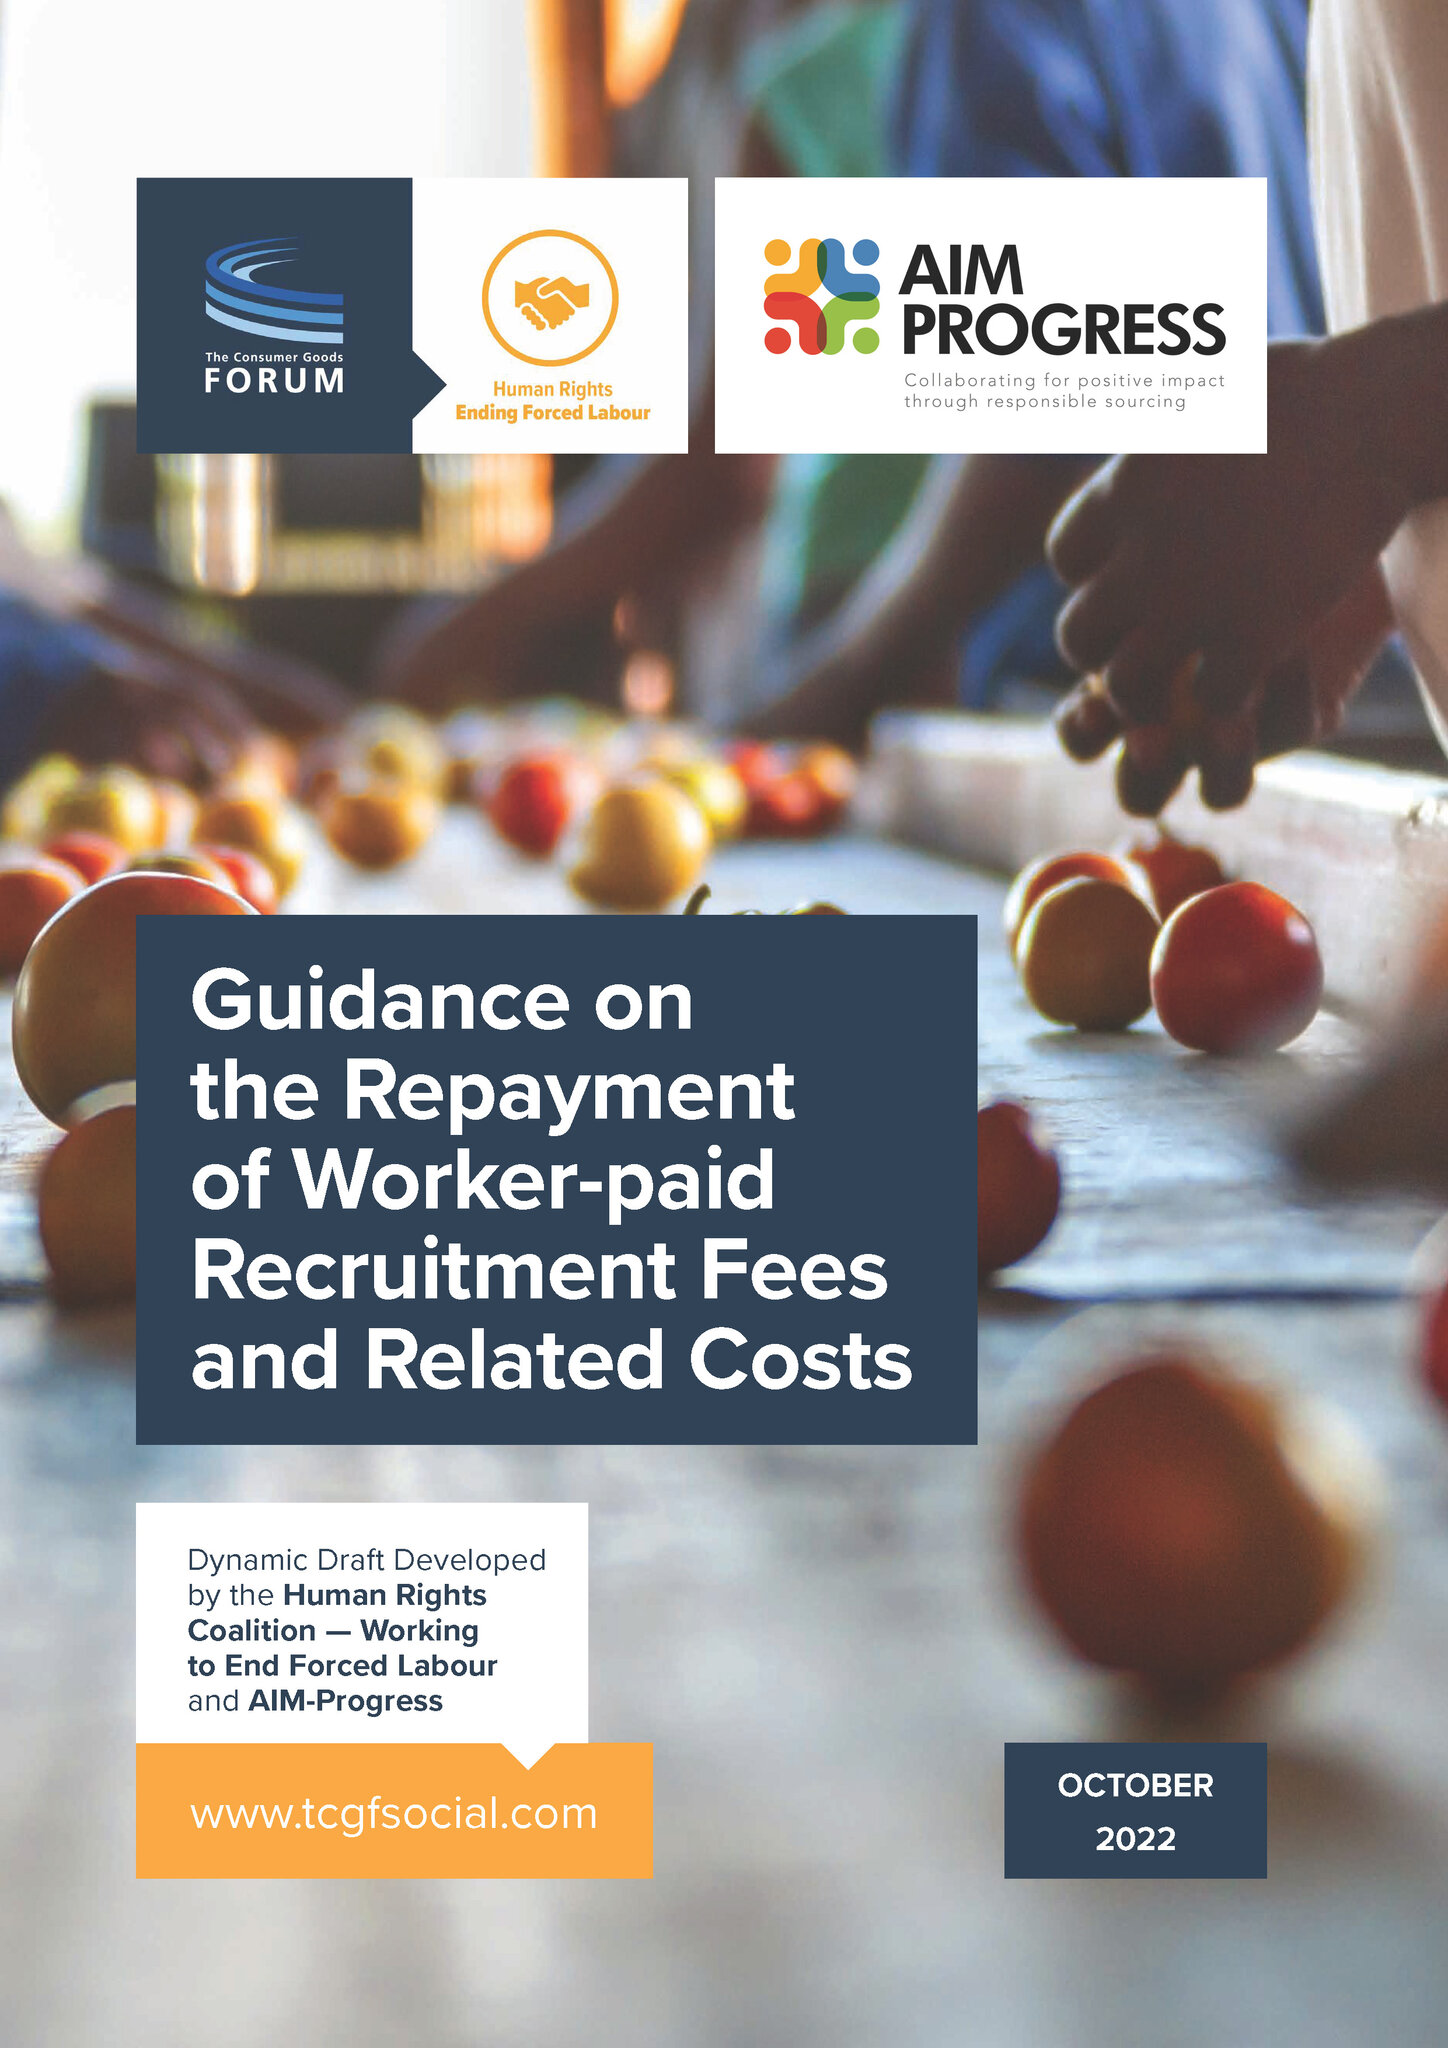 Guidance on the Repayment of Worker-paid Recruitment Fees and Related Costs